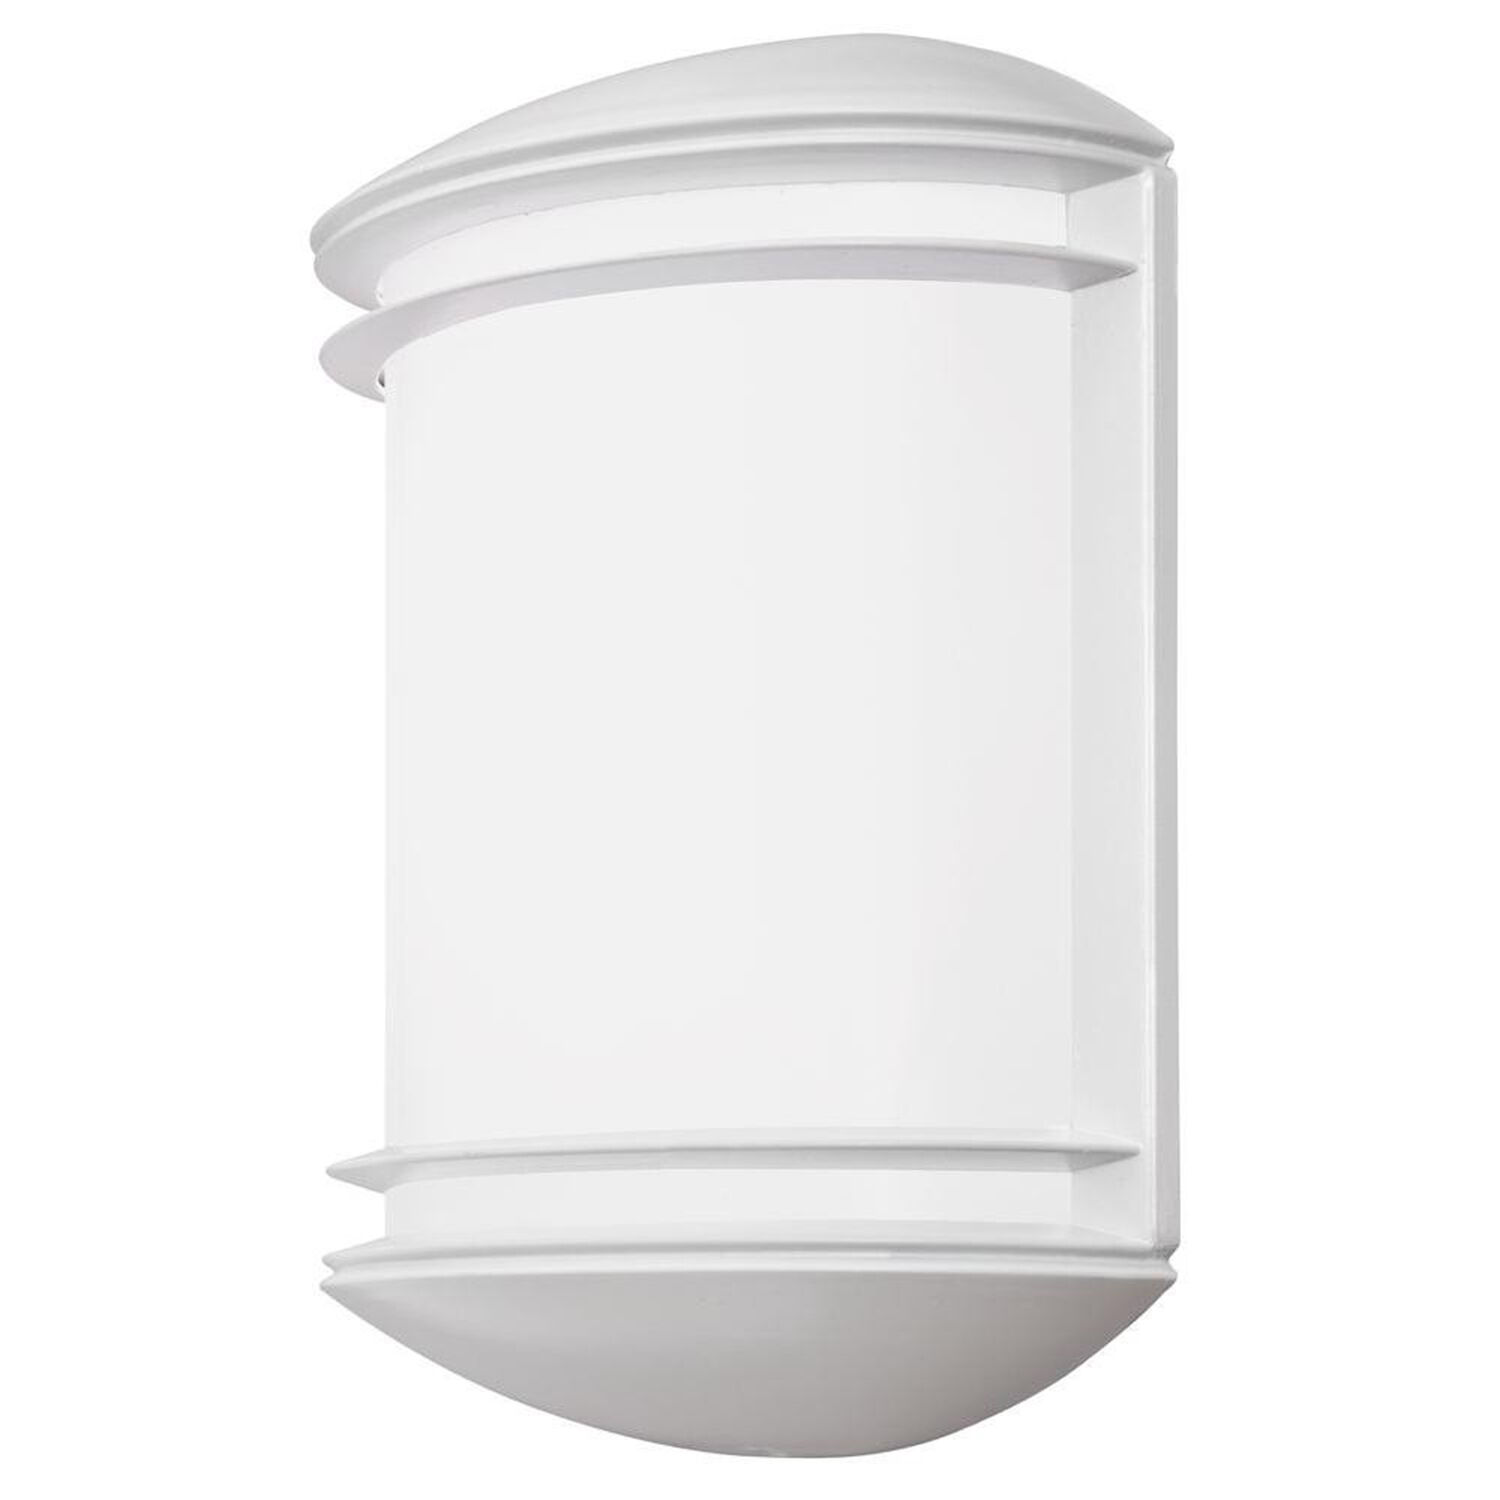 Details about   Lithonia Lighting OLLWD P1 40K MVOLT DDB M6 LED Outdoor Cylinder Downlight 9W, 